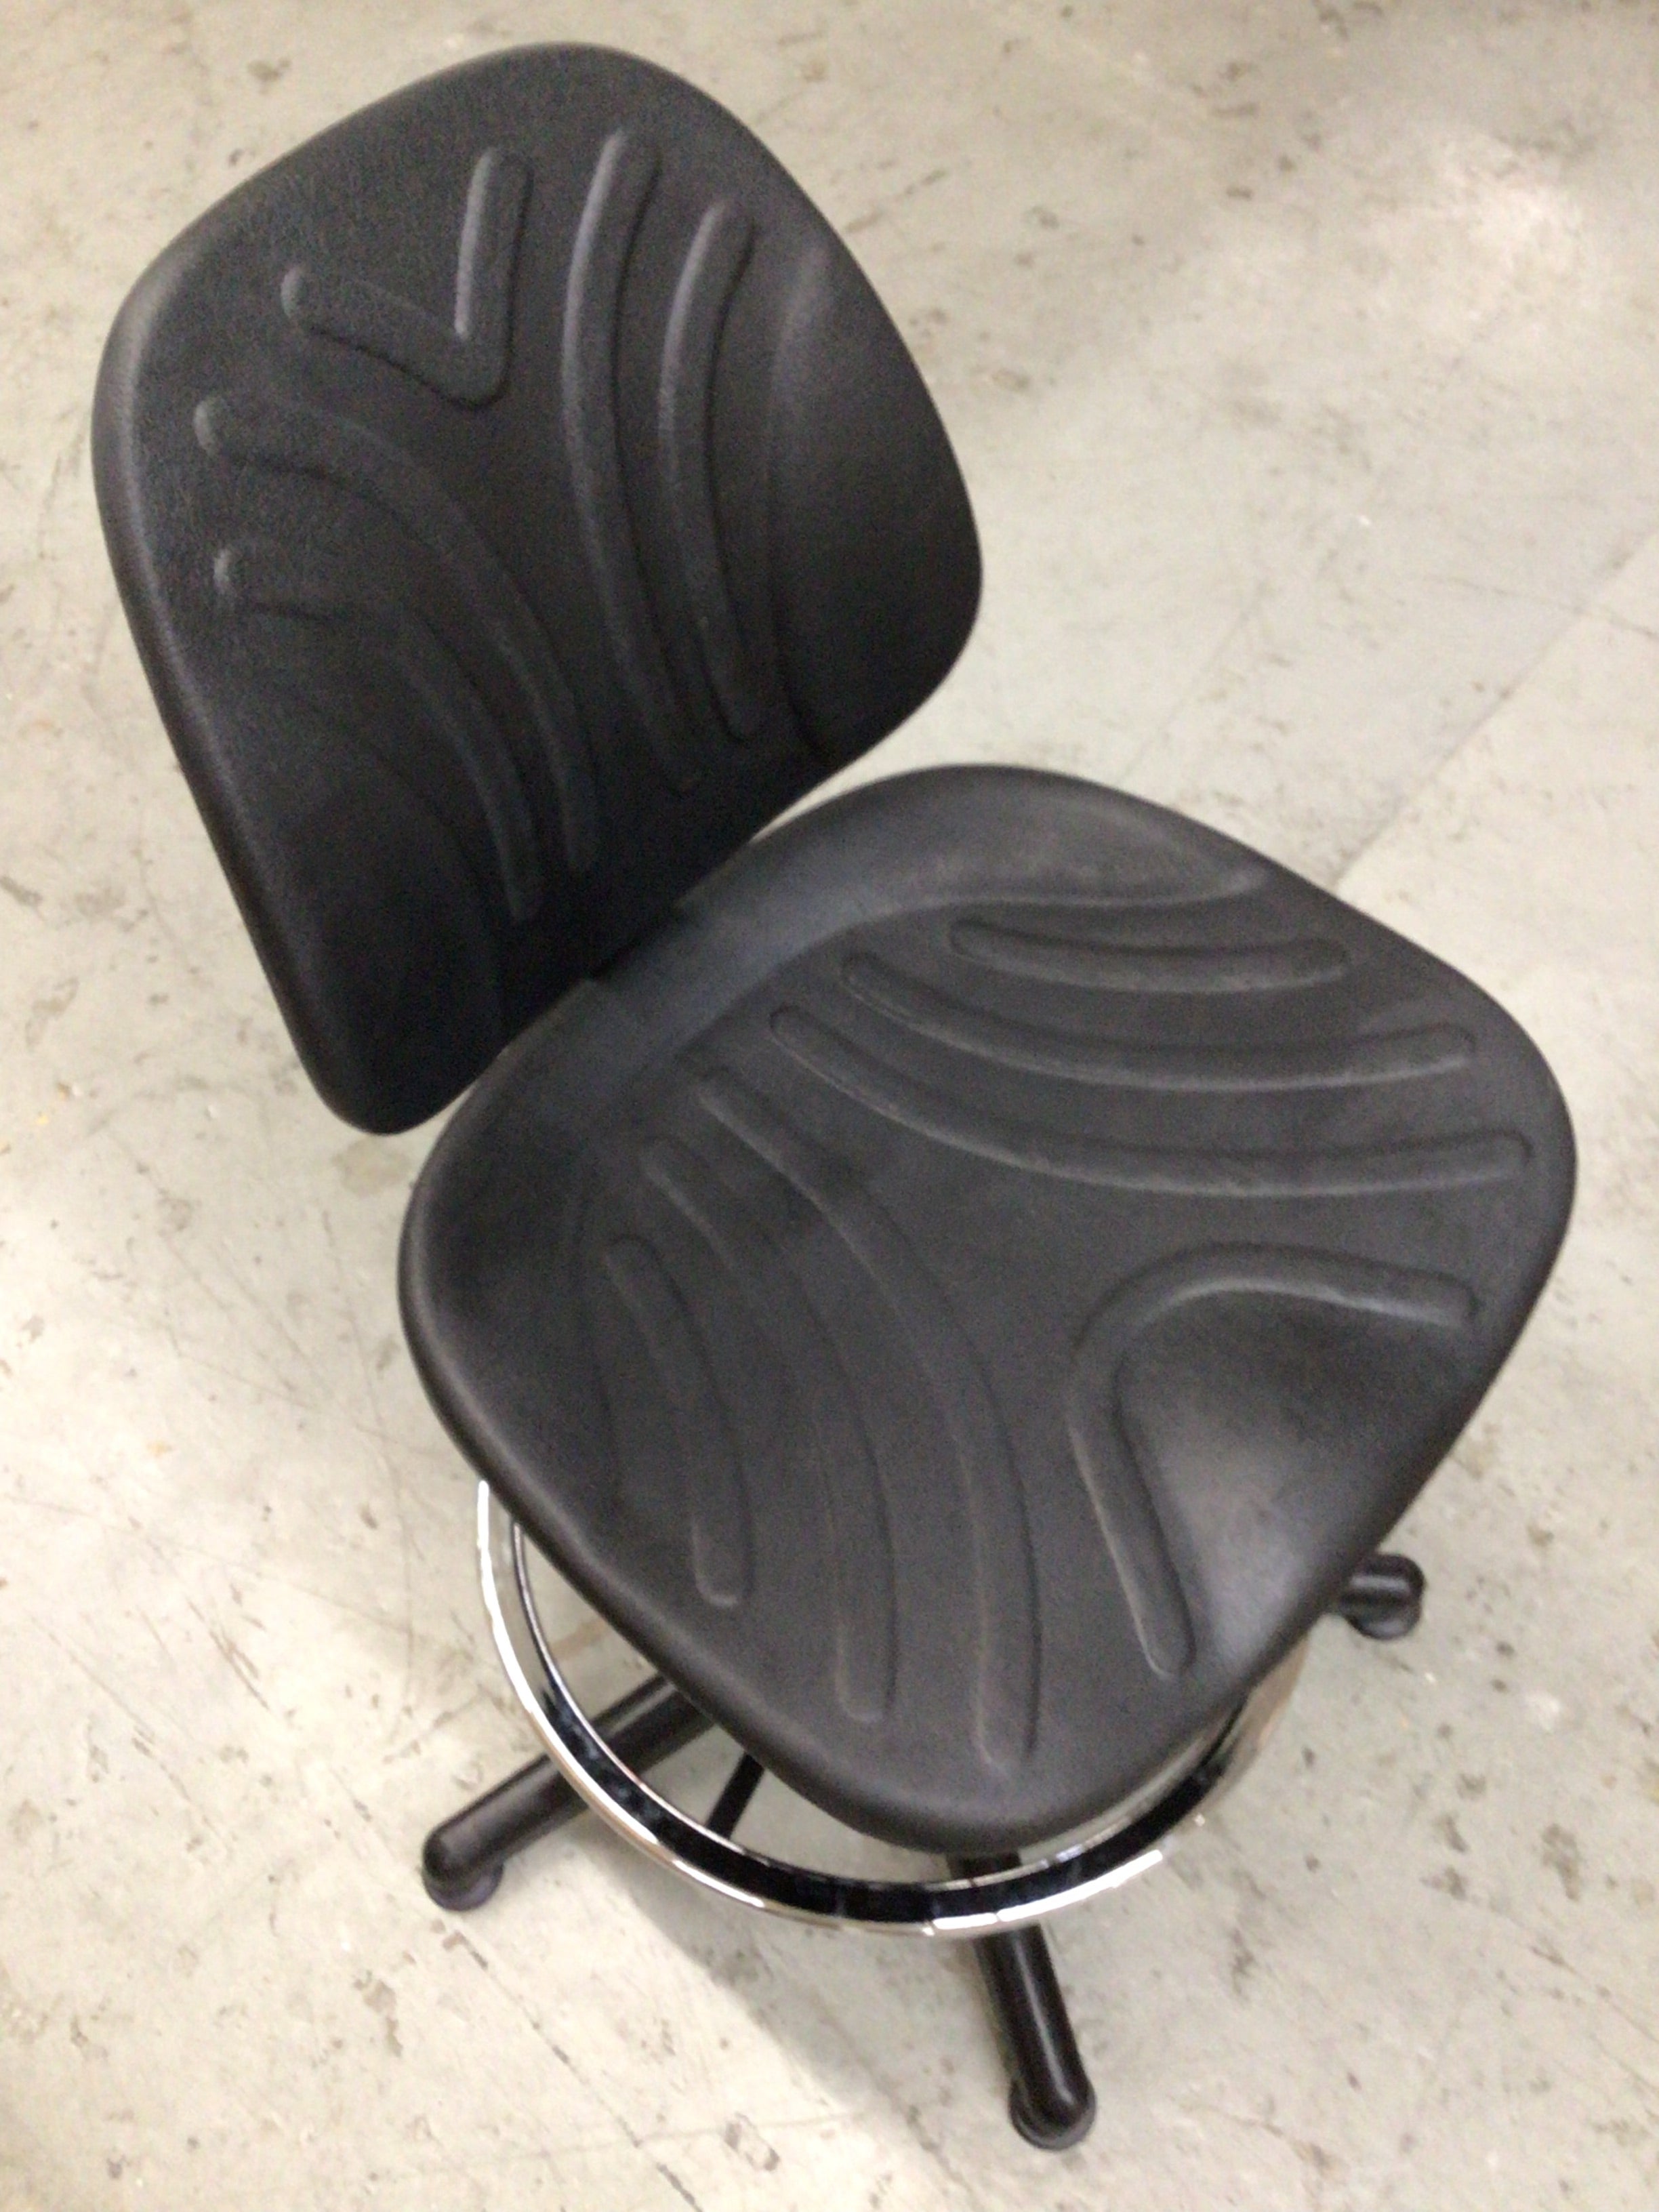 BEVCO Drafting Chair 7500D Polyurethane 350 lb 21 - 31 in Seat Height *OPEN BOX* (8129800306926)